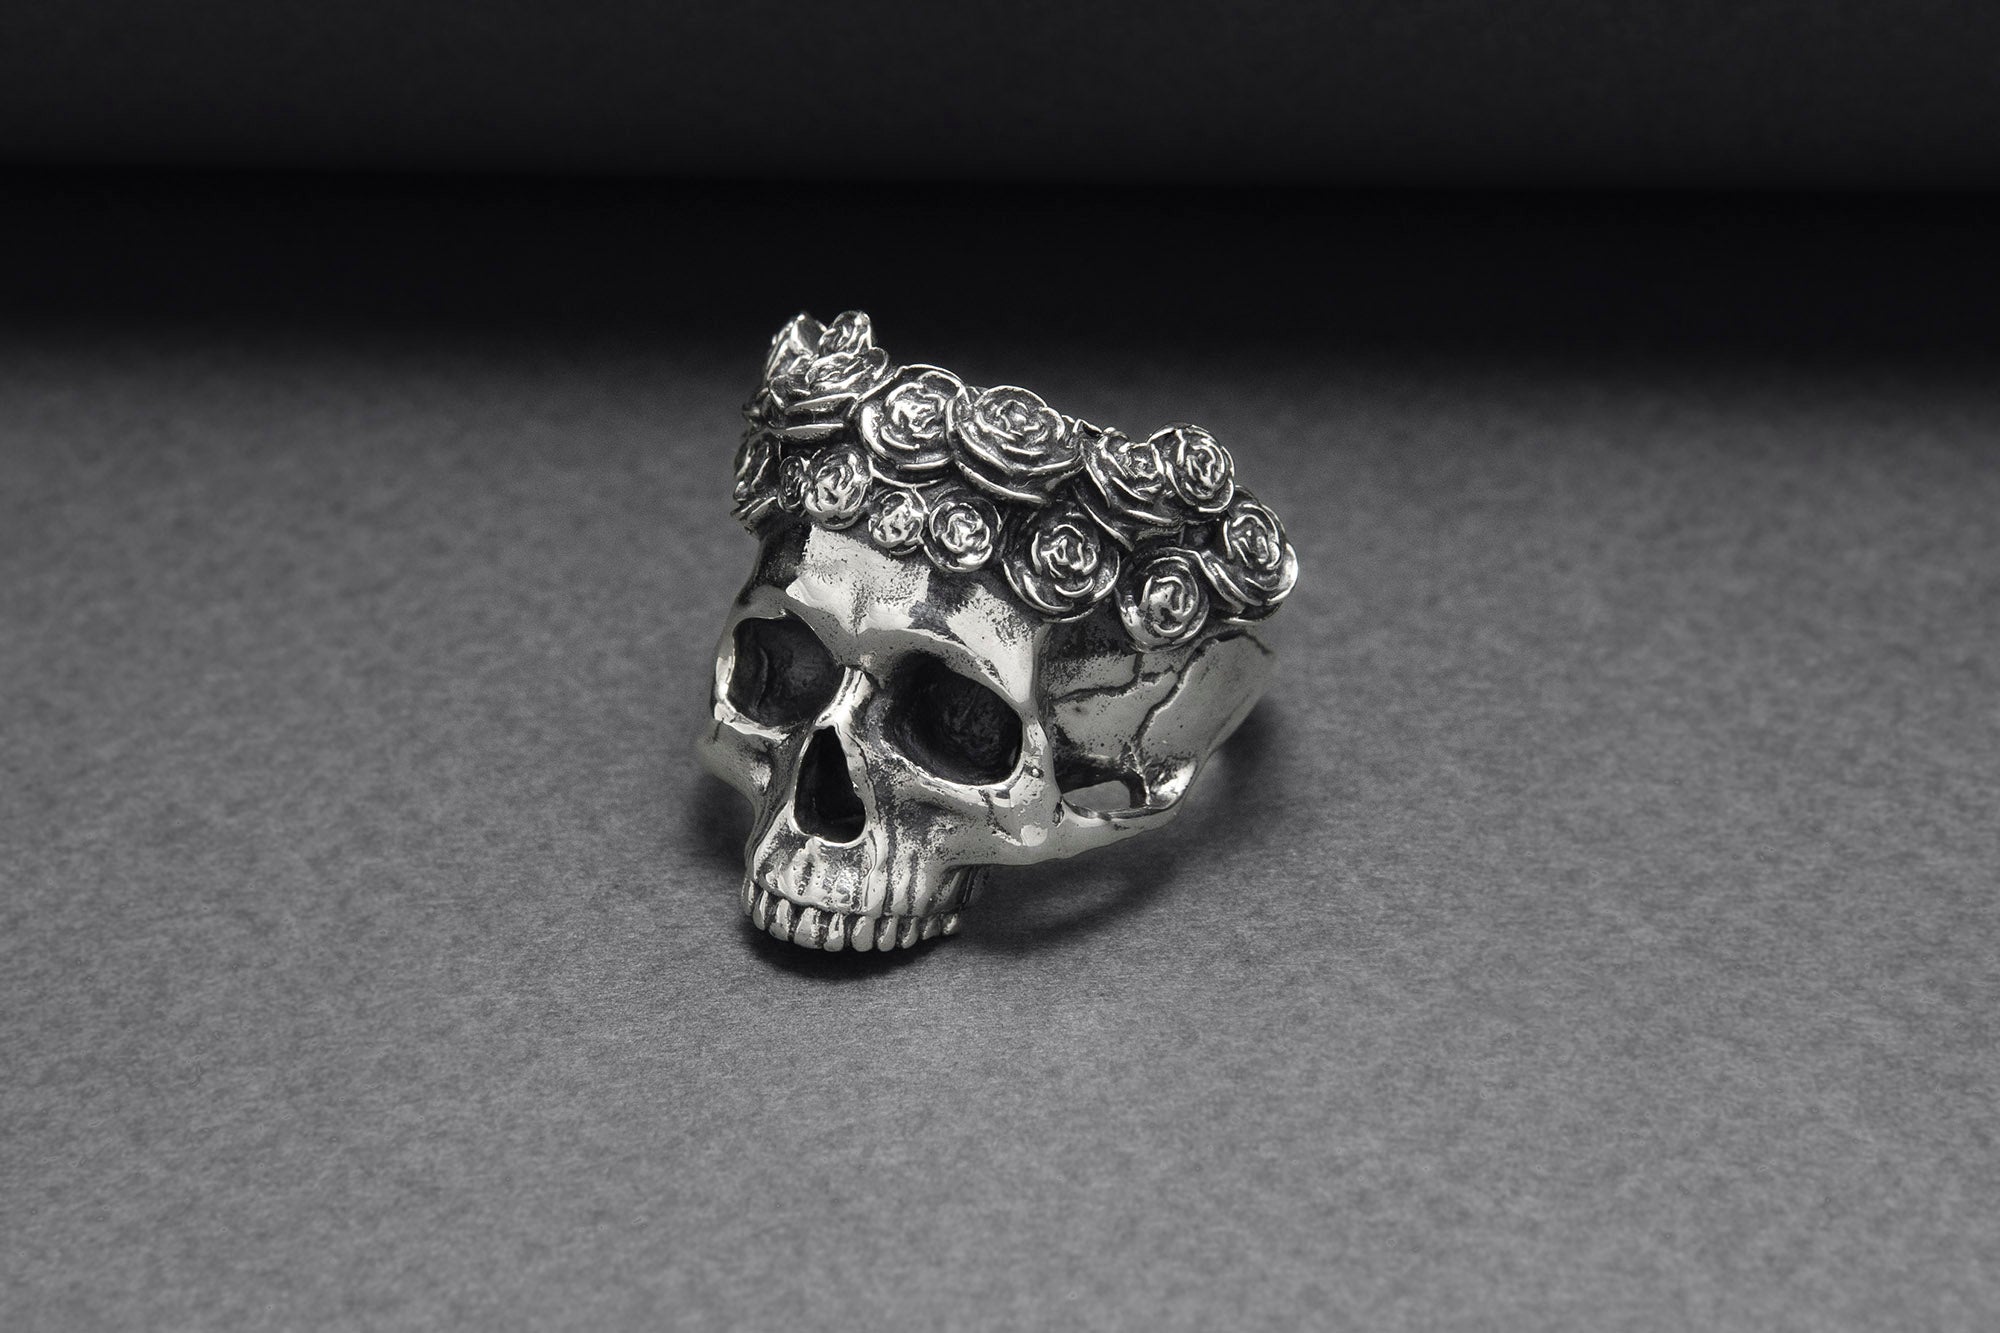 925 Silver Skull Ring with Rose Crown, Handcrafted Brutal Jewelry